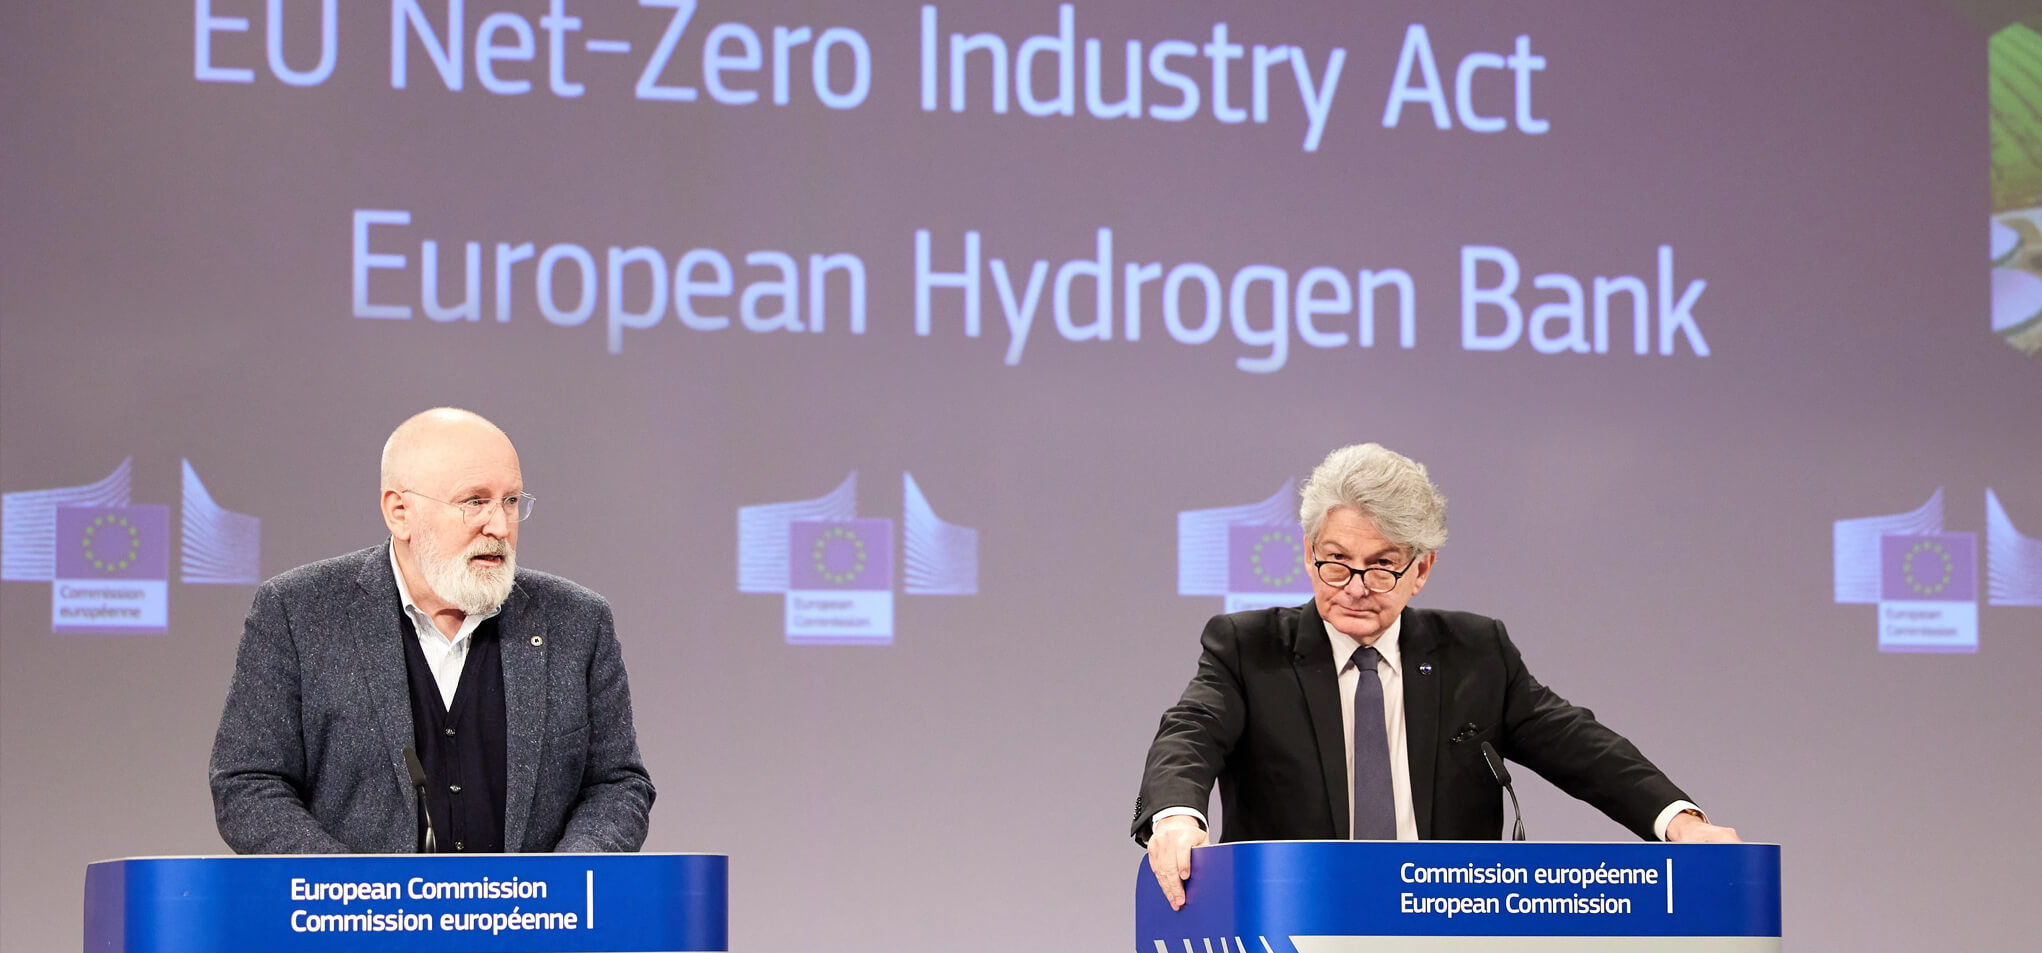 Net Zero Industry Act unveiled by the European Commission